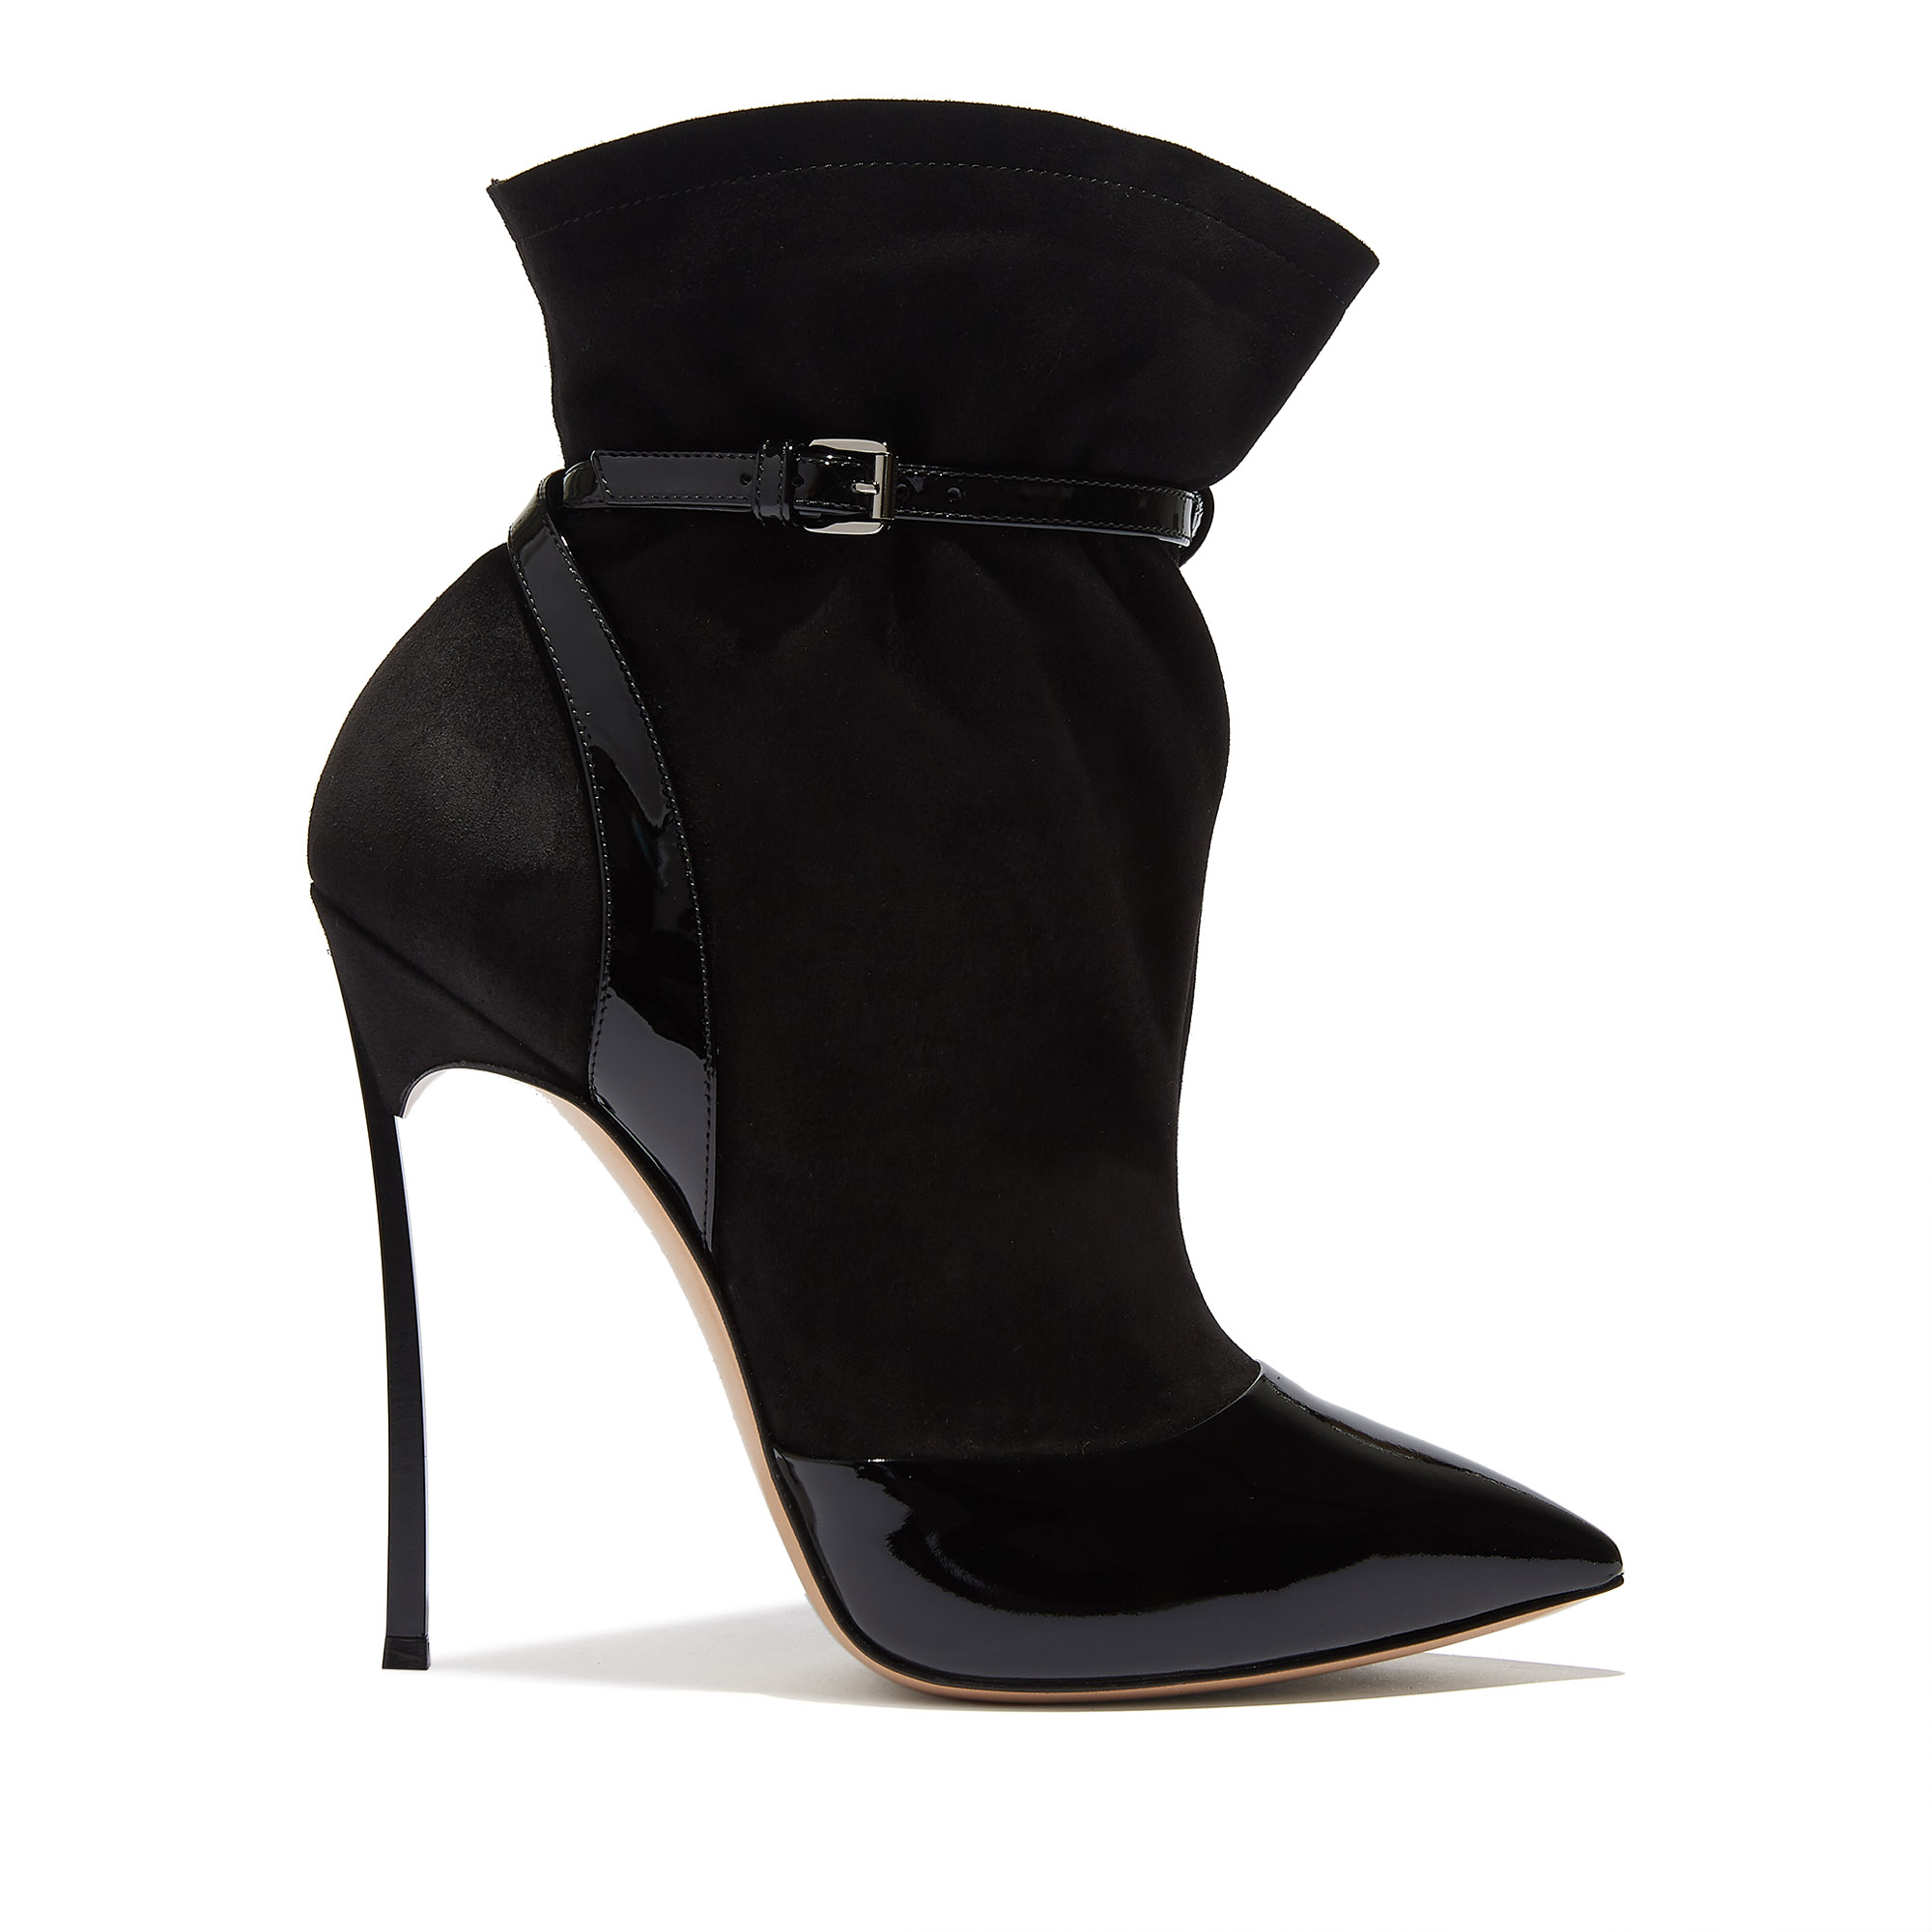 Blade Vogue Ankle Boots in Black for Women | Casadei®